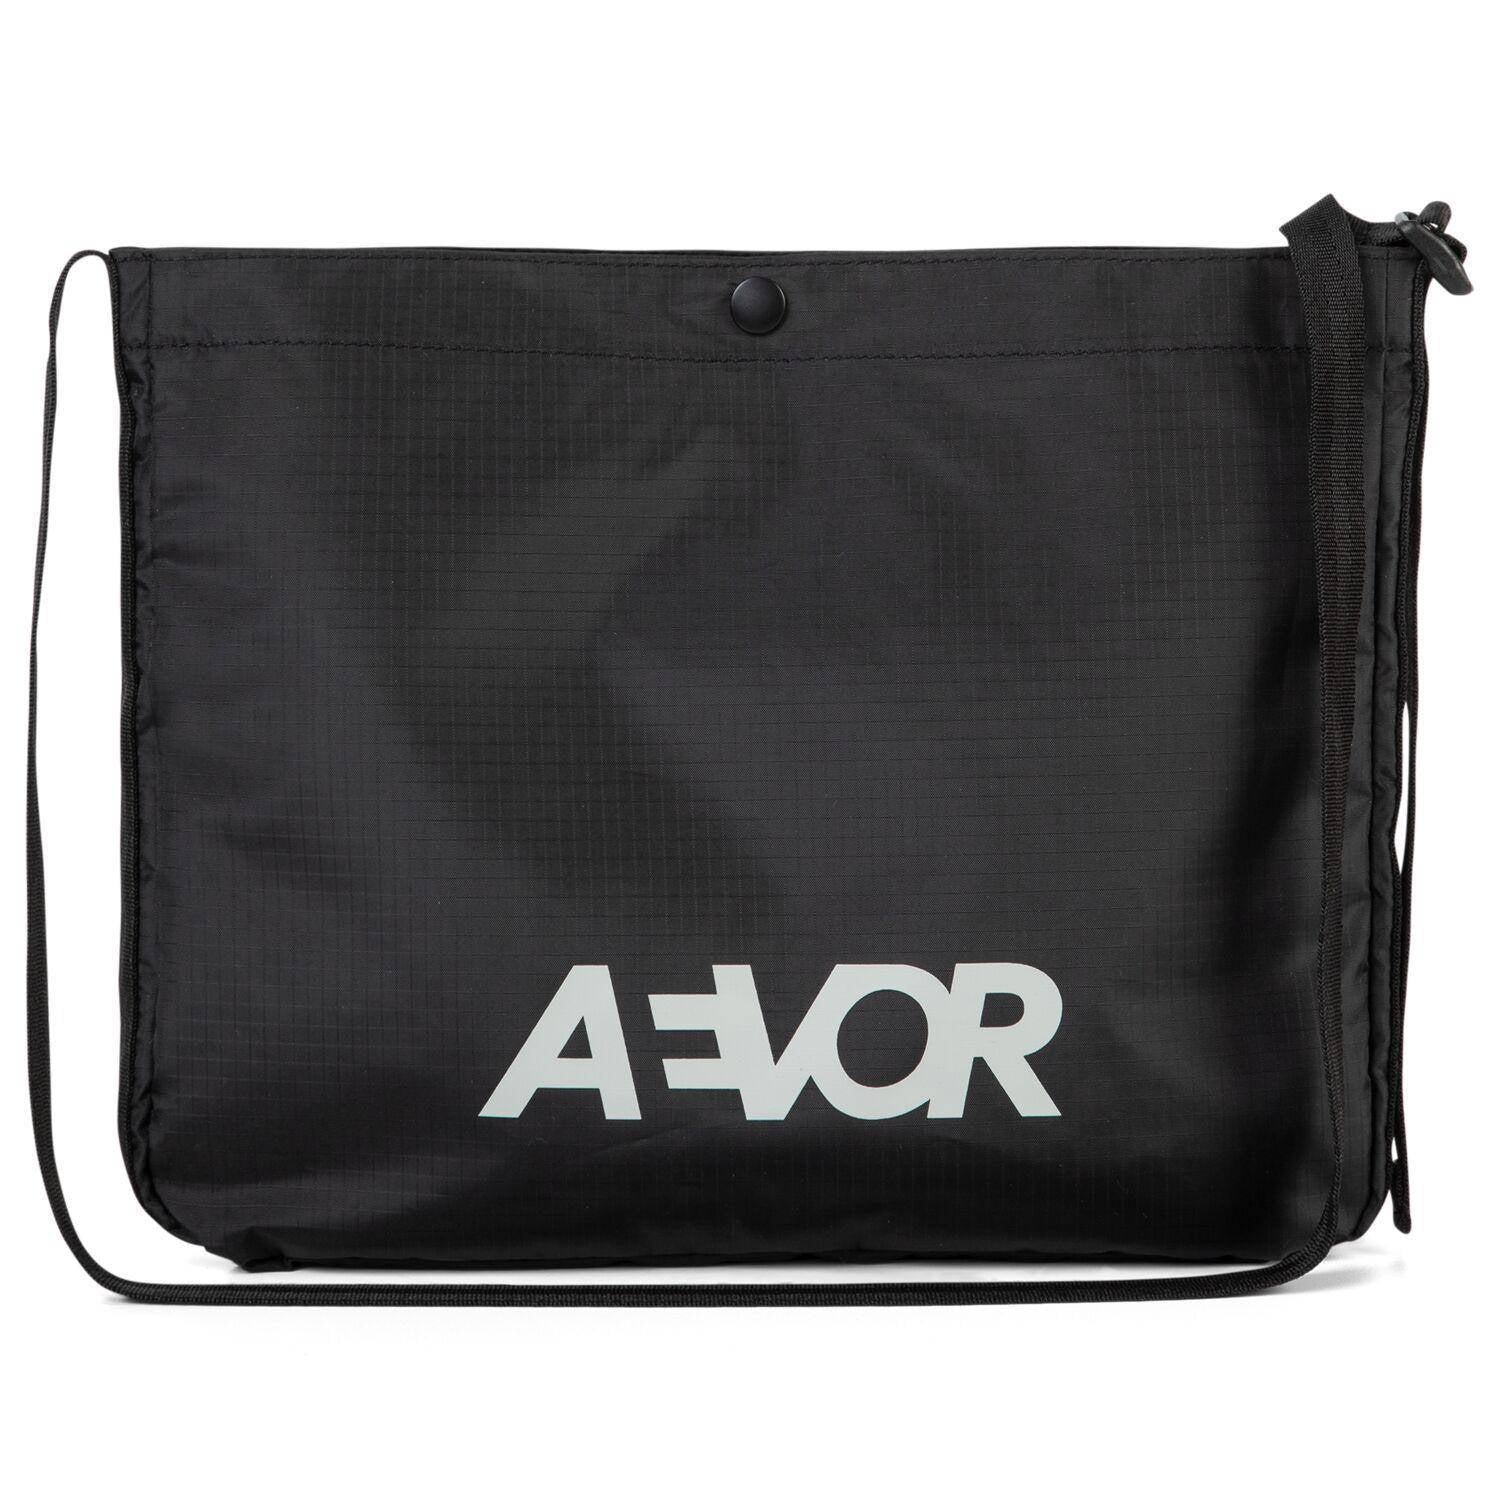 Aevor Bike Musette - Recycled Polyester Ripstop Black Bags